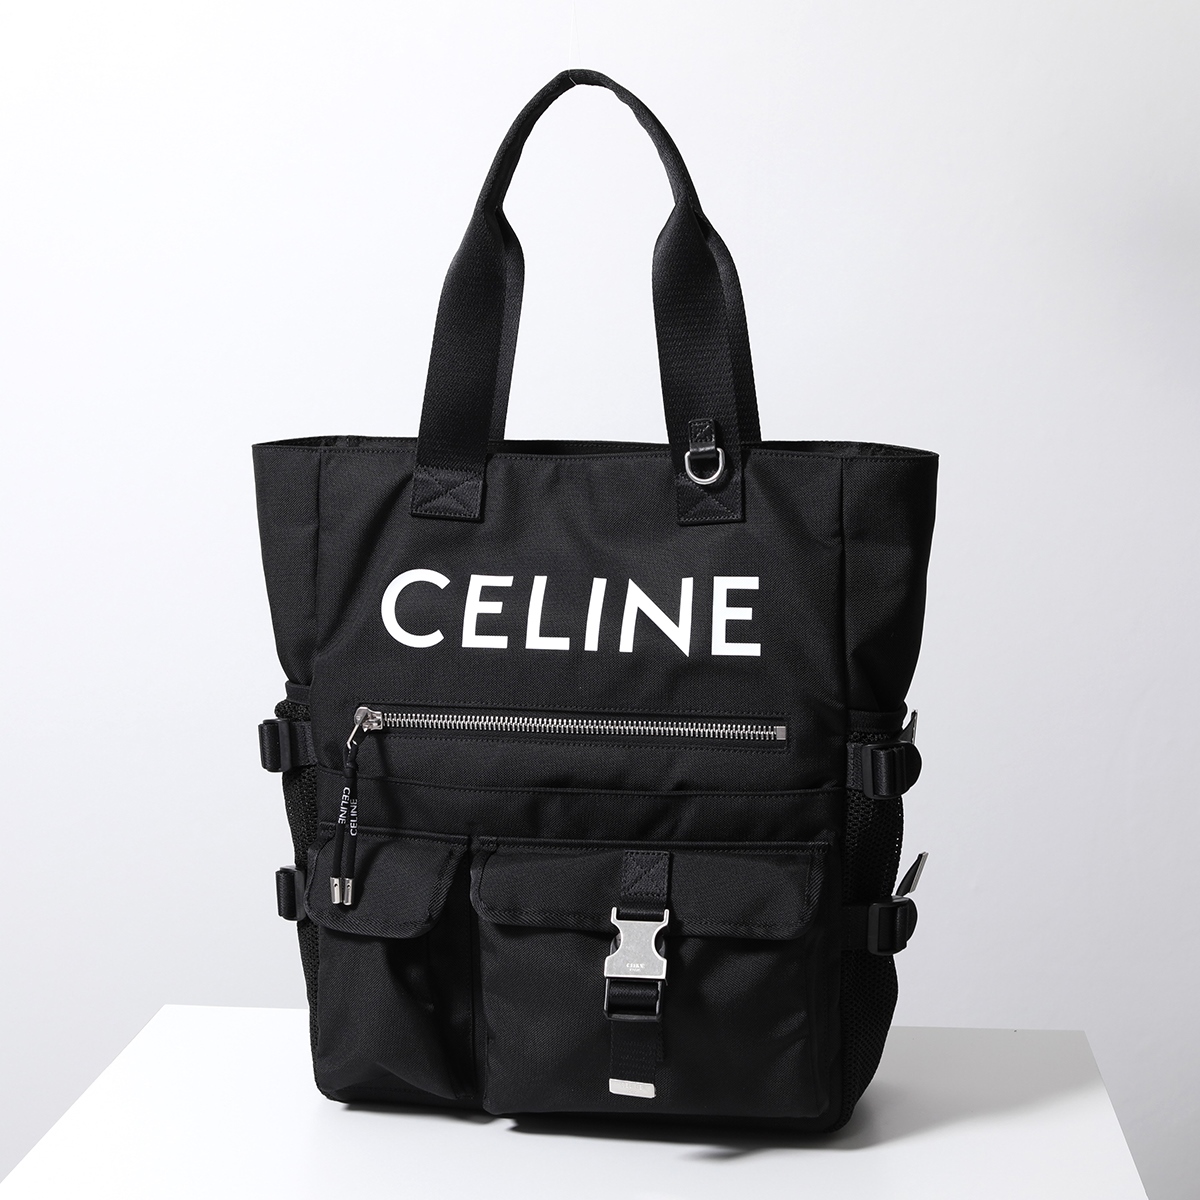 CELINE セリーヌ トートバッグ 116072DMT.38SI メンズ ナイロン ロゴ プリント ショッピングバッグ 鞄 Black｜s-musee｜02